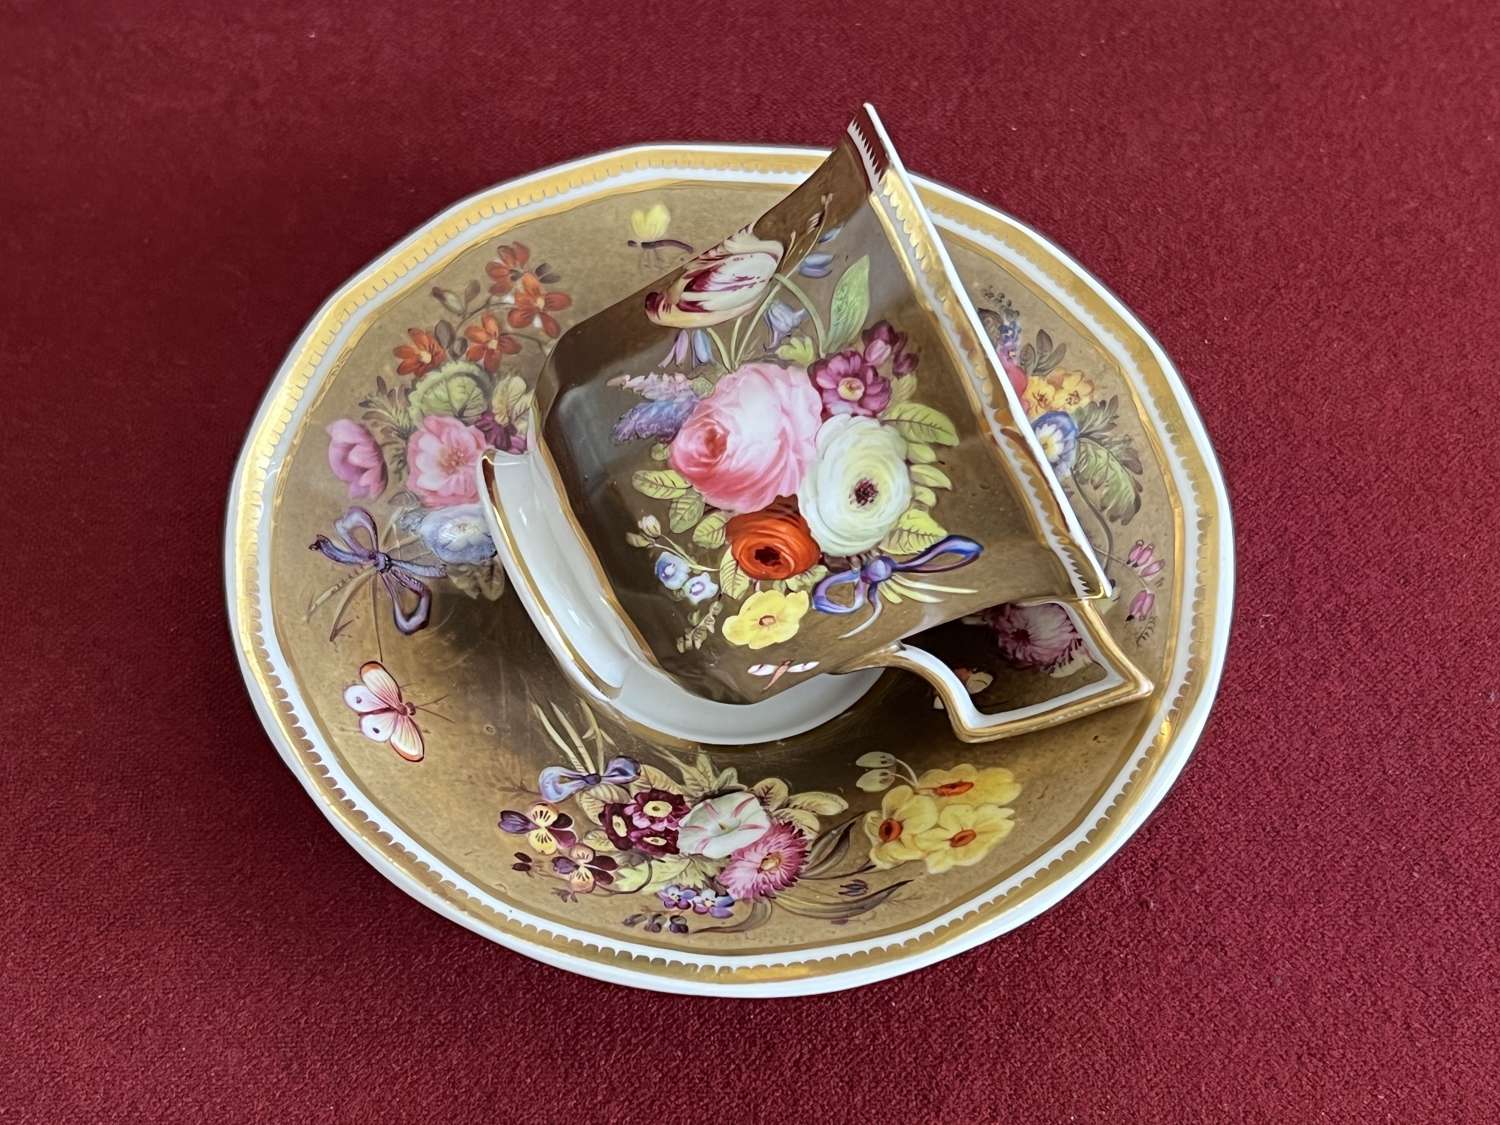 A Spode porcelain Coffee Cup and Saucer very finely decorated c.1830